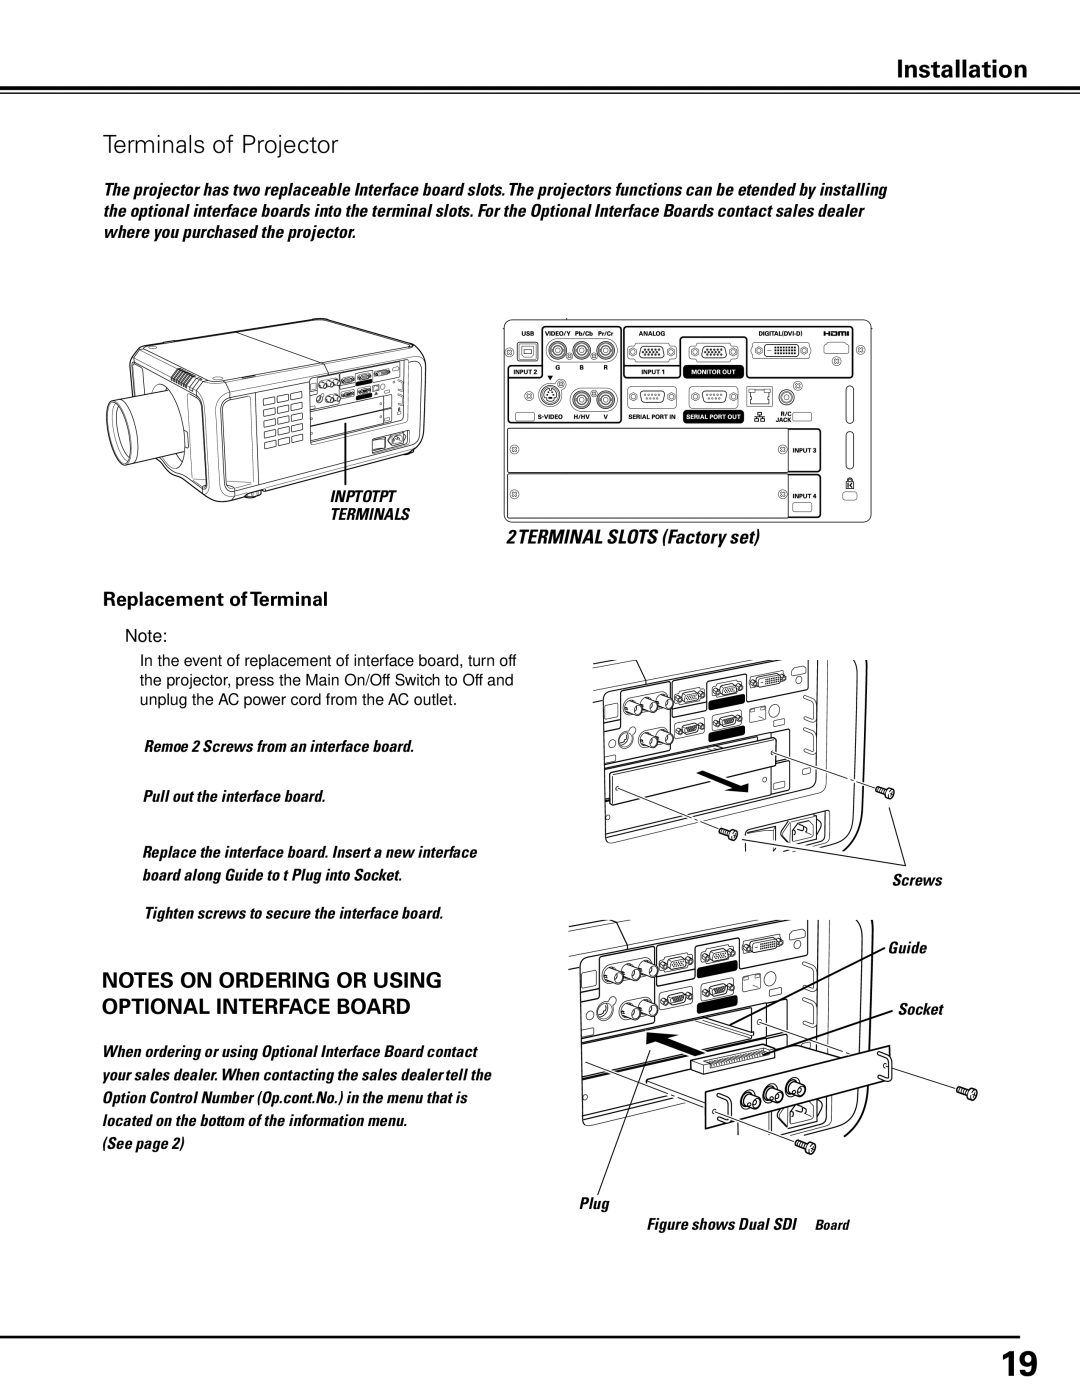 Sanyo PDG-DHT8000L owner manual Terminals of Projector, Replacement of Terminal 